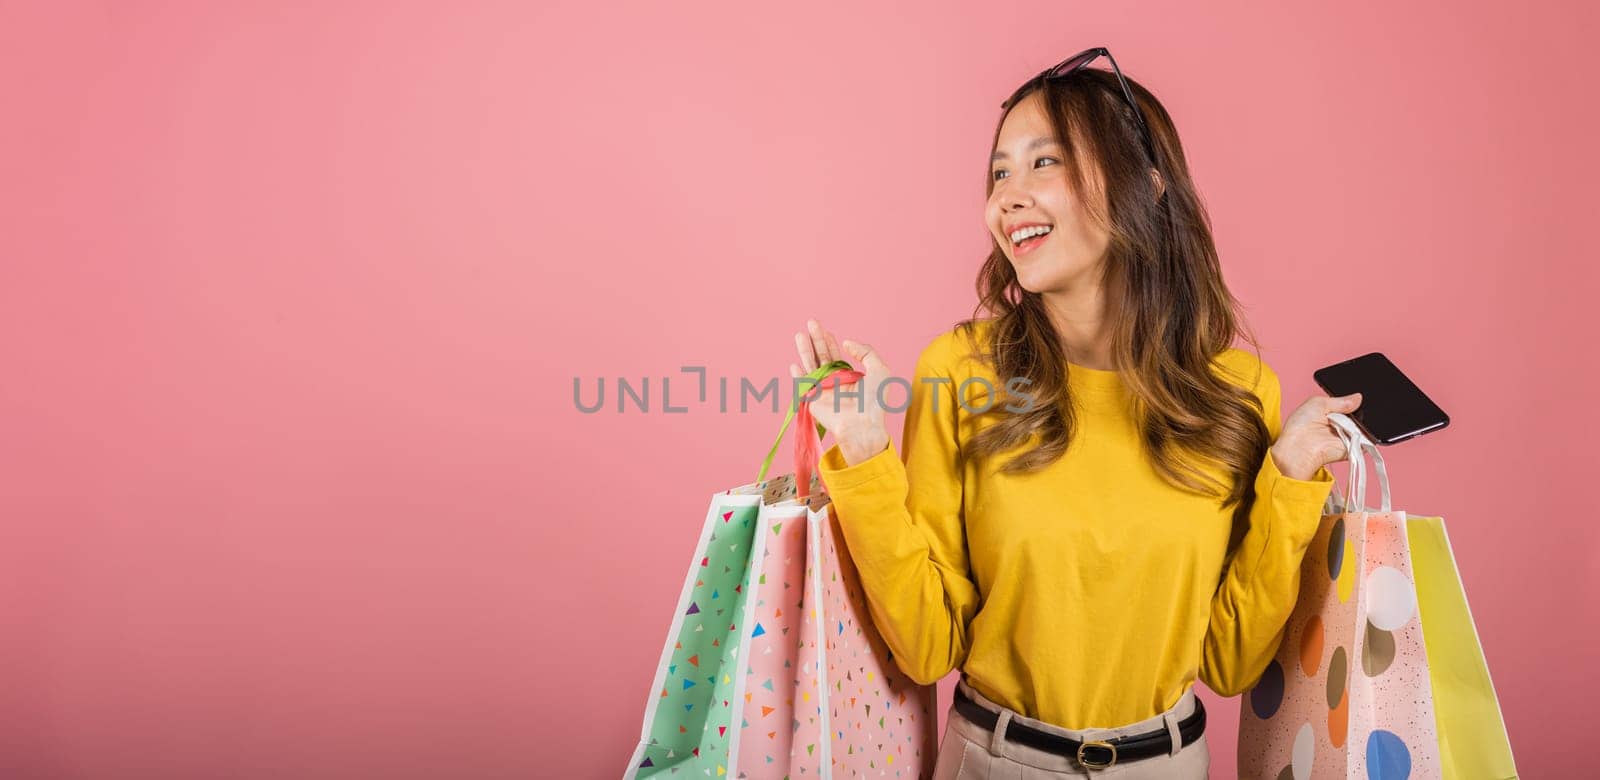 Portrait Asian happy beautiful young woman teen shopper smiling standing excited holding online shopping bags online colorful on mobile phone or smartphone studio shot isolated on pink background